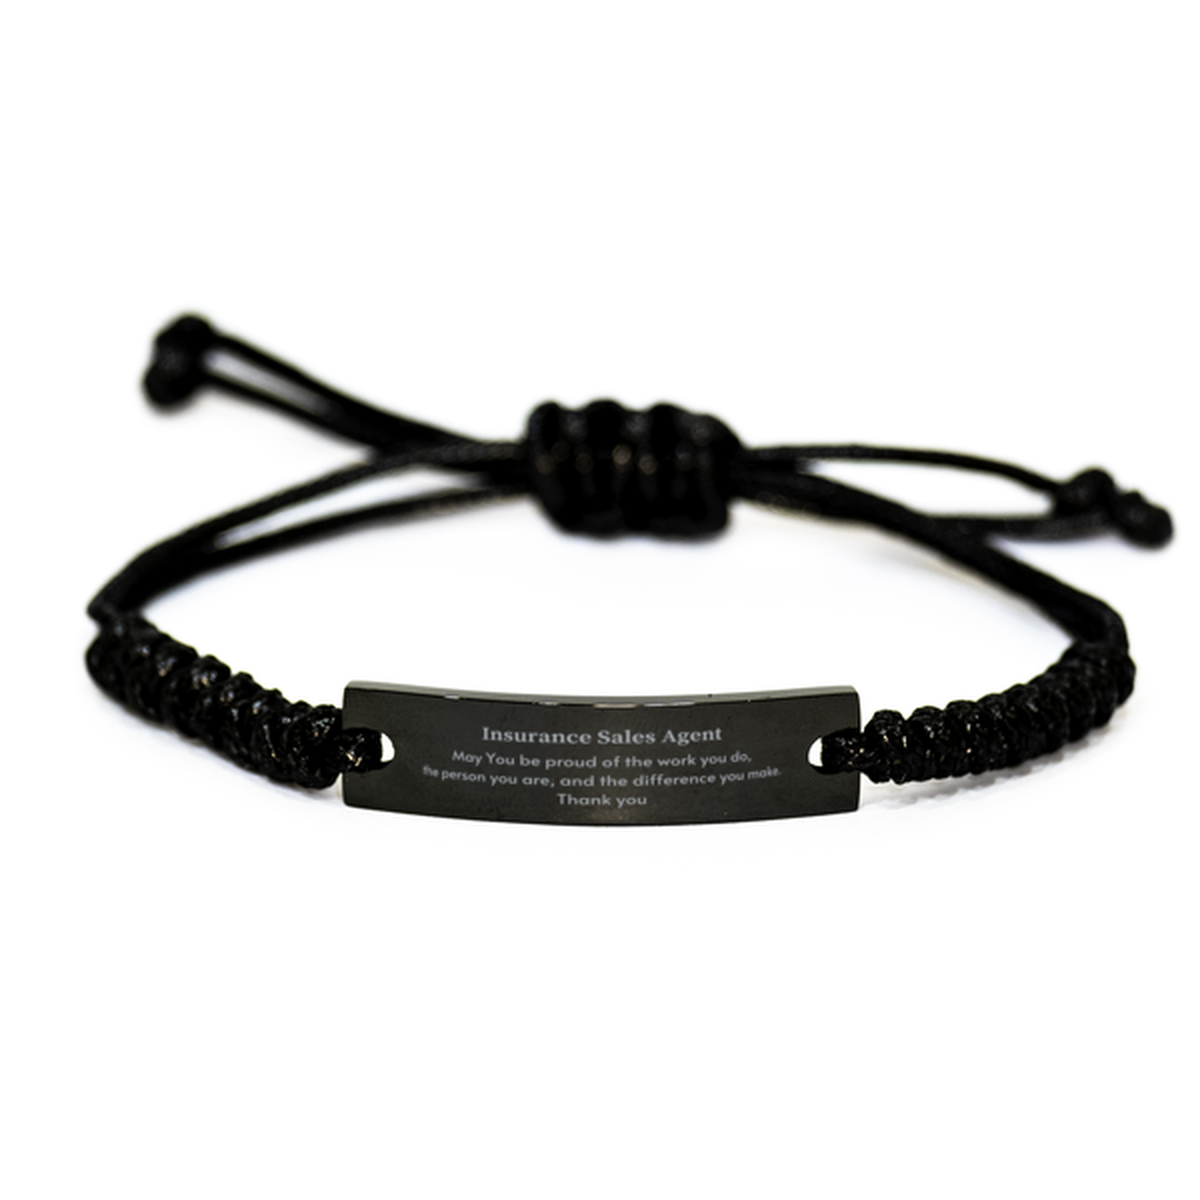 Heartwarming Black Rope Bracelet Retirement Coworkers Gifts for Insurance Sales Agent, Insurance Sales Agent May You be proud of the work you do, the person you are Gifts for Boss Men Women Friends